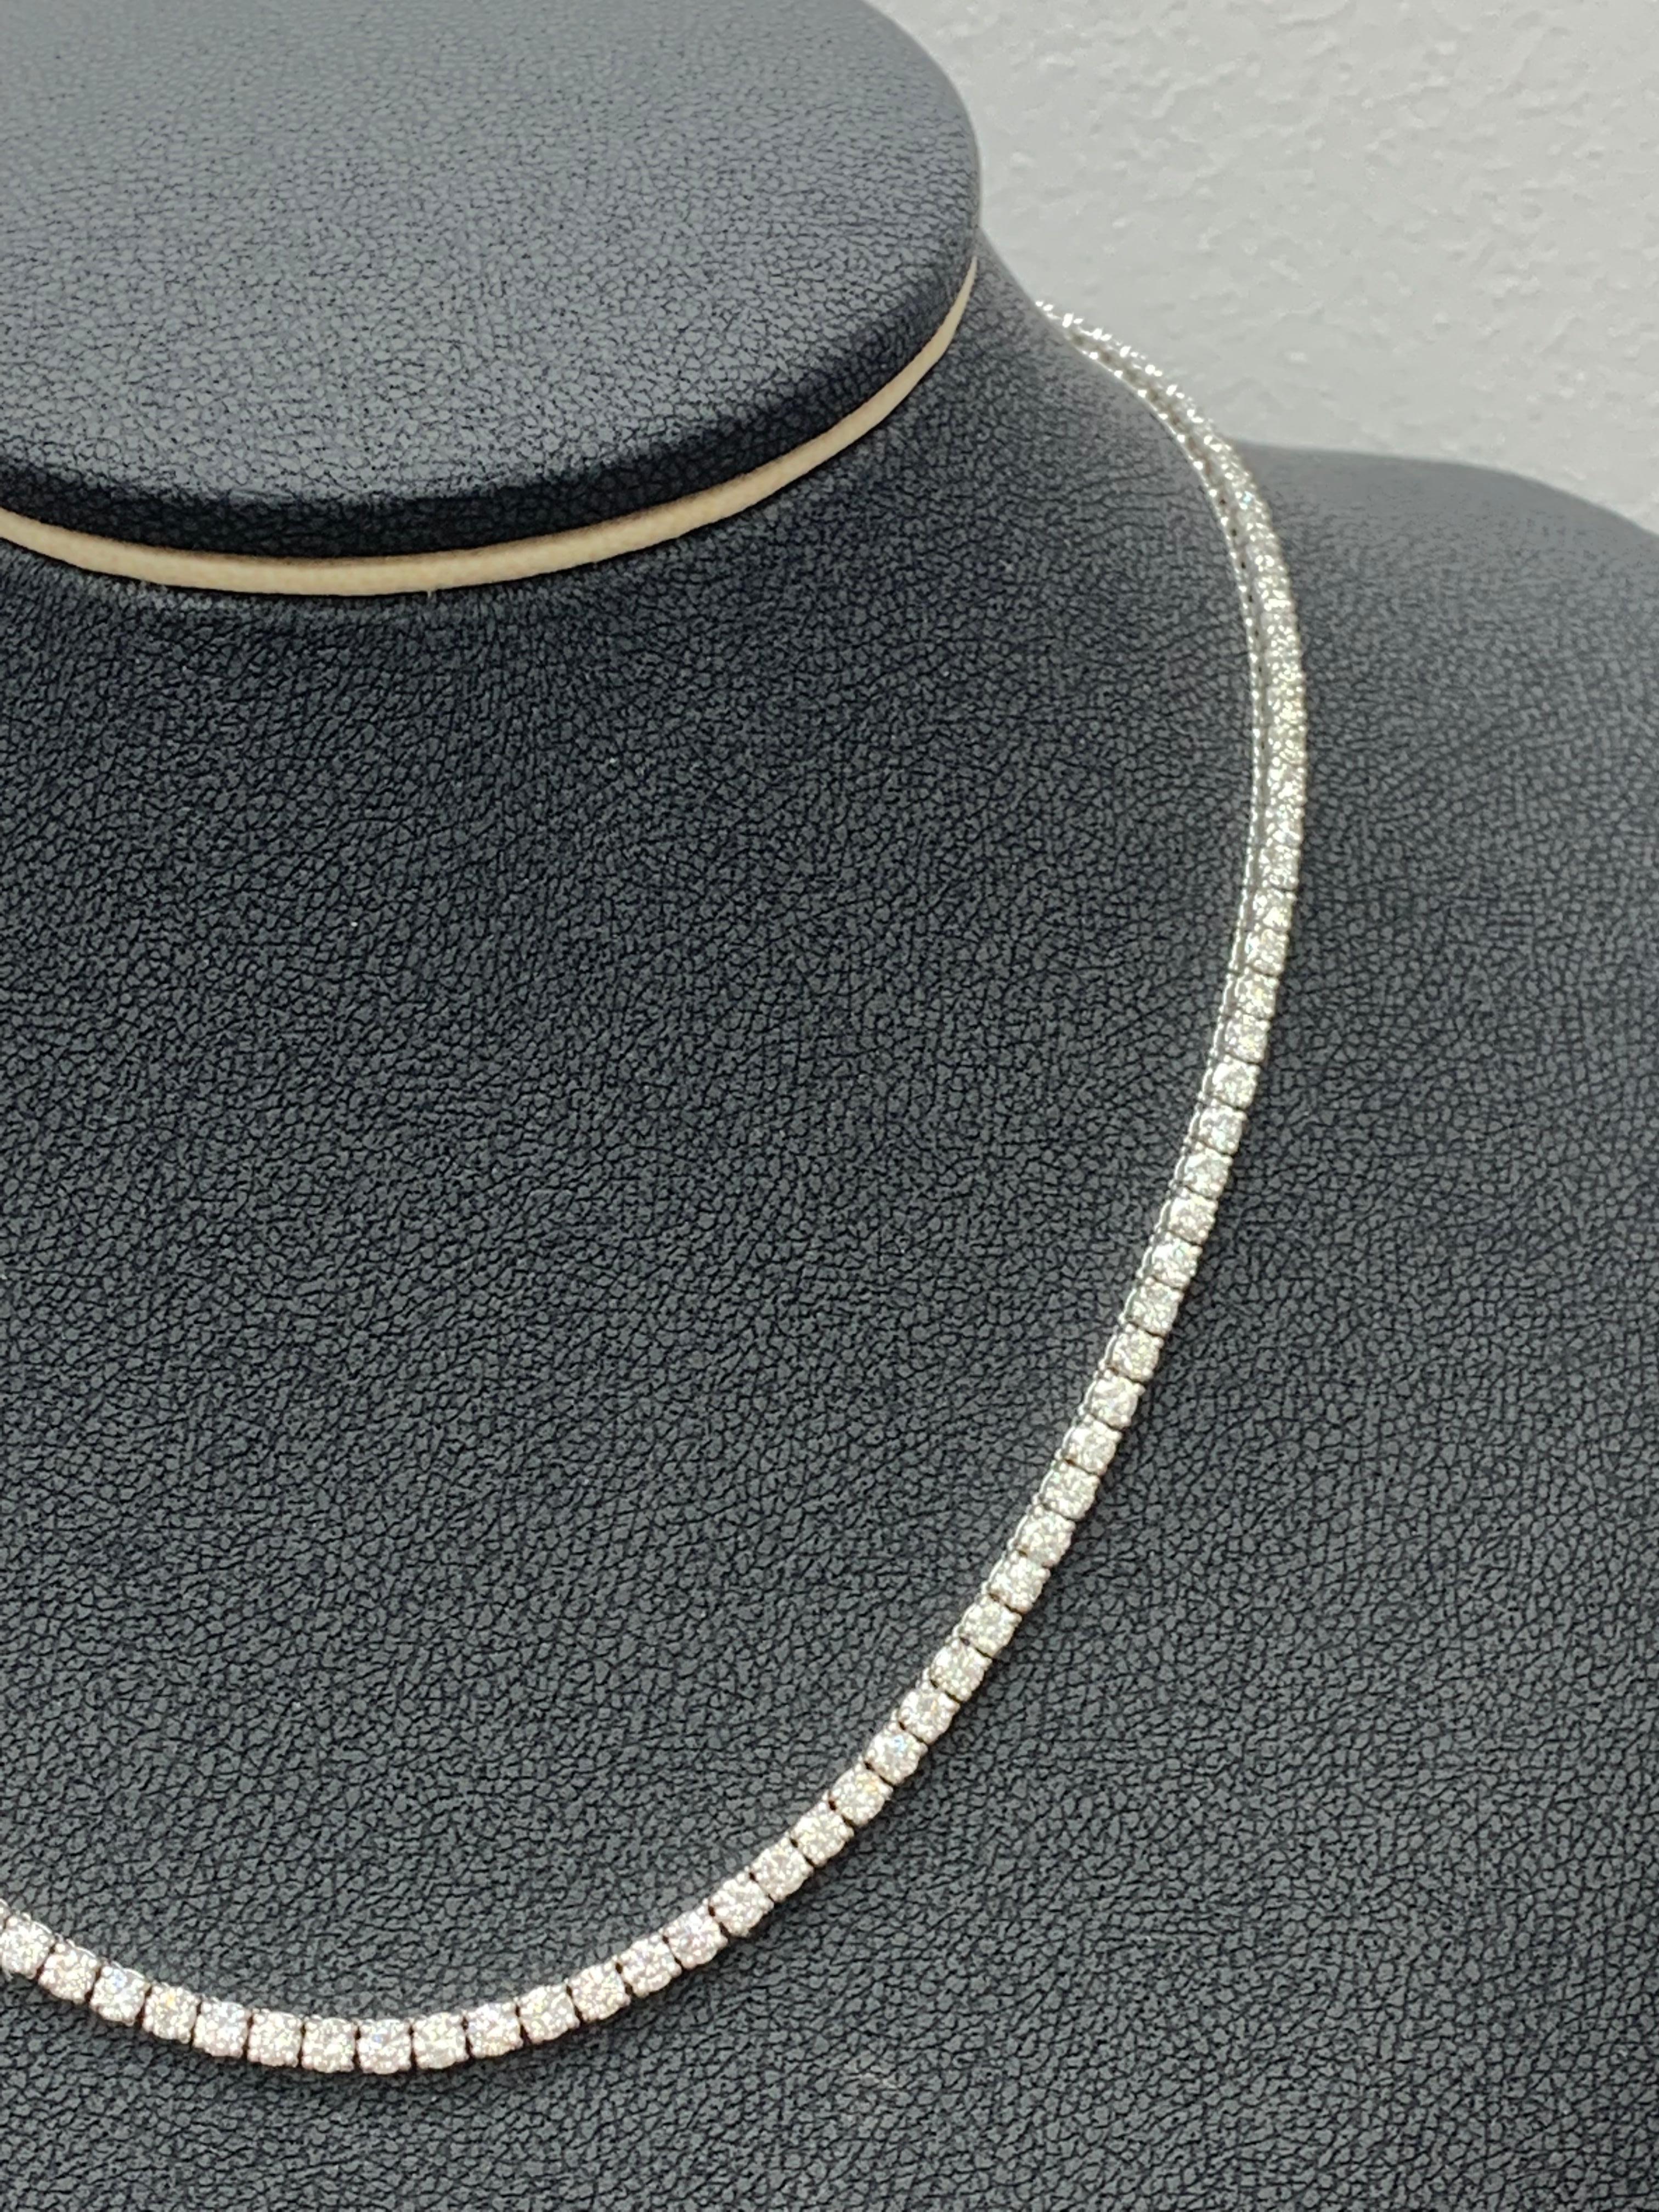 13.01 Carat Diamond Tennis Necklace in 14K White Gold For Sale 3